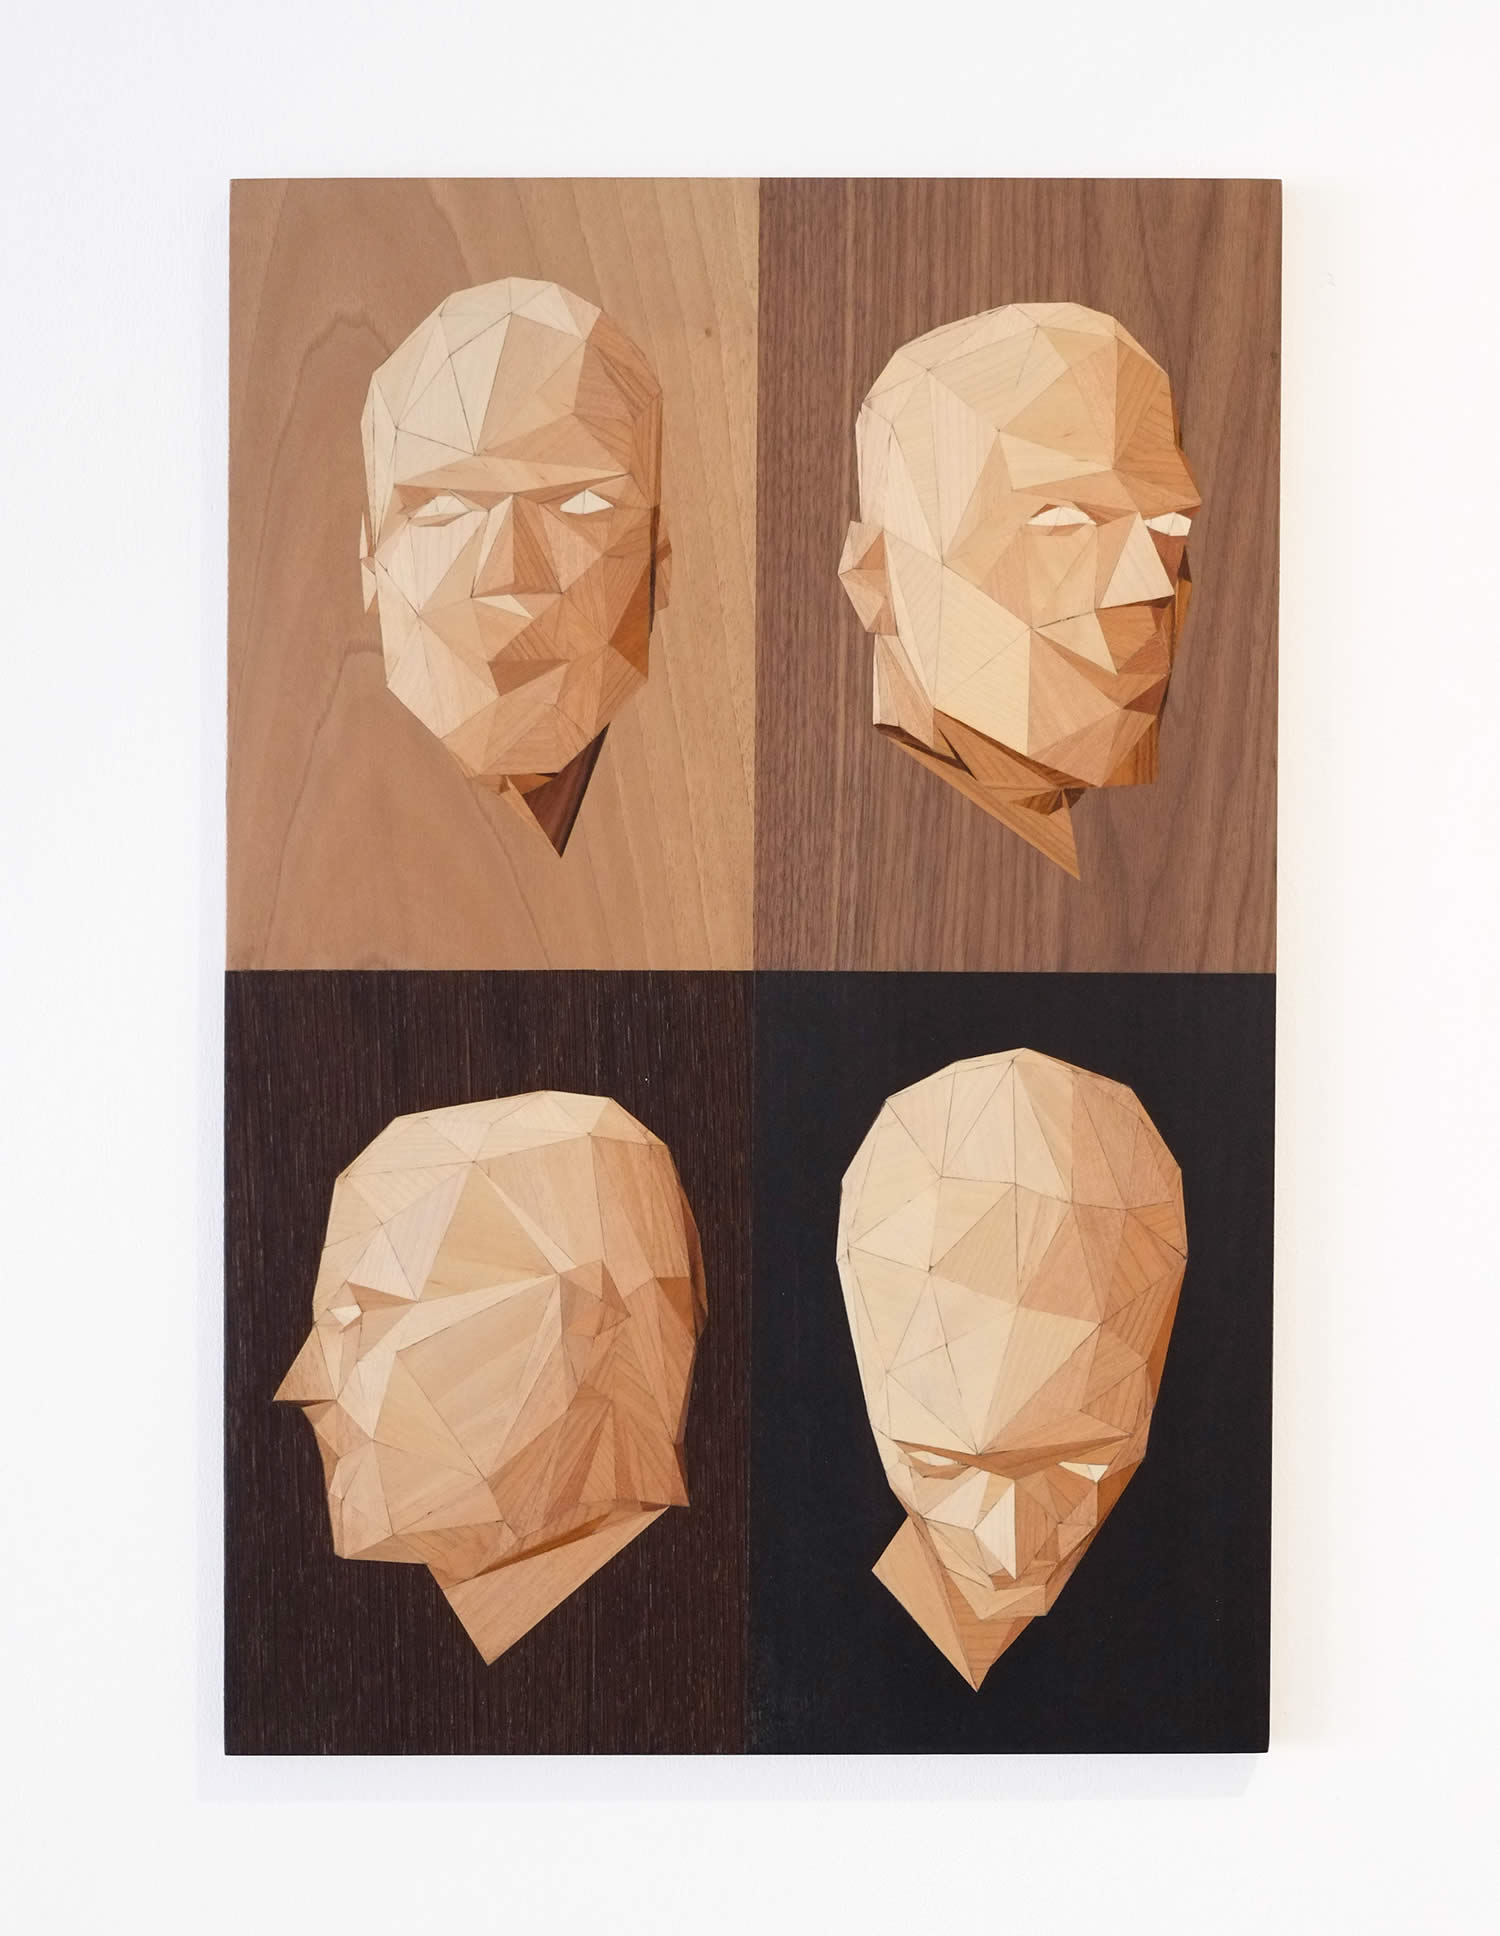 Wood Art Quid by Rocco Pezzella8